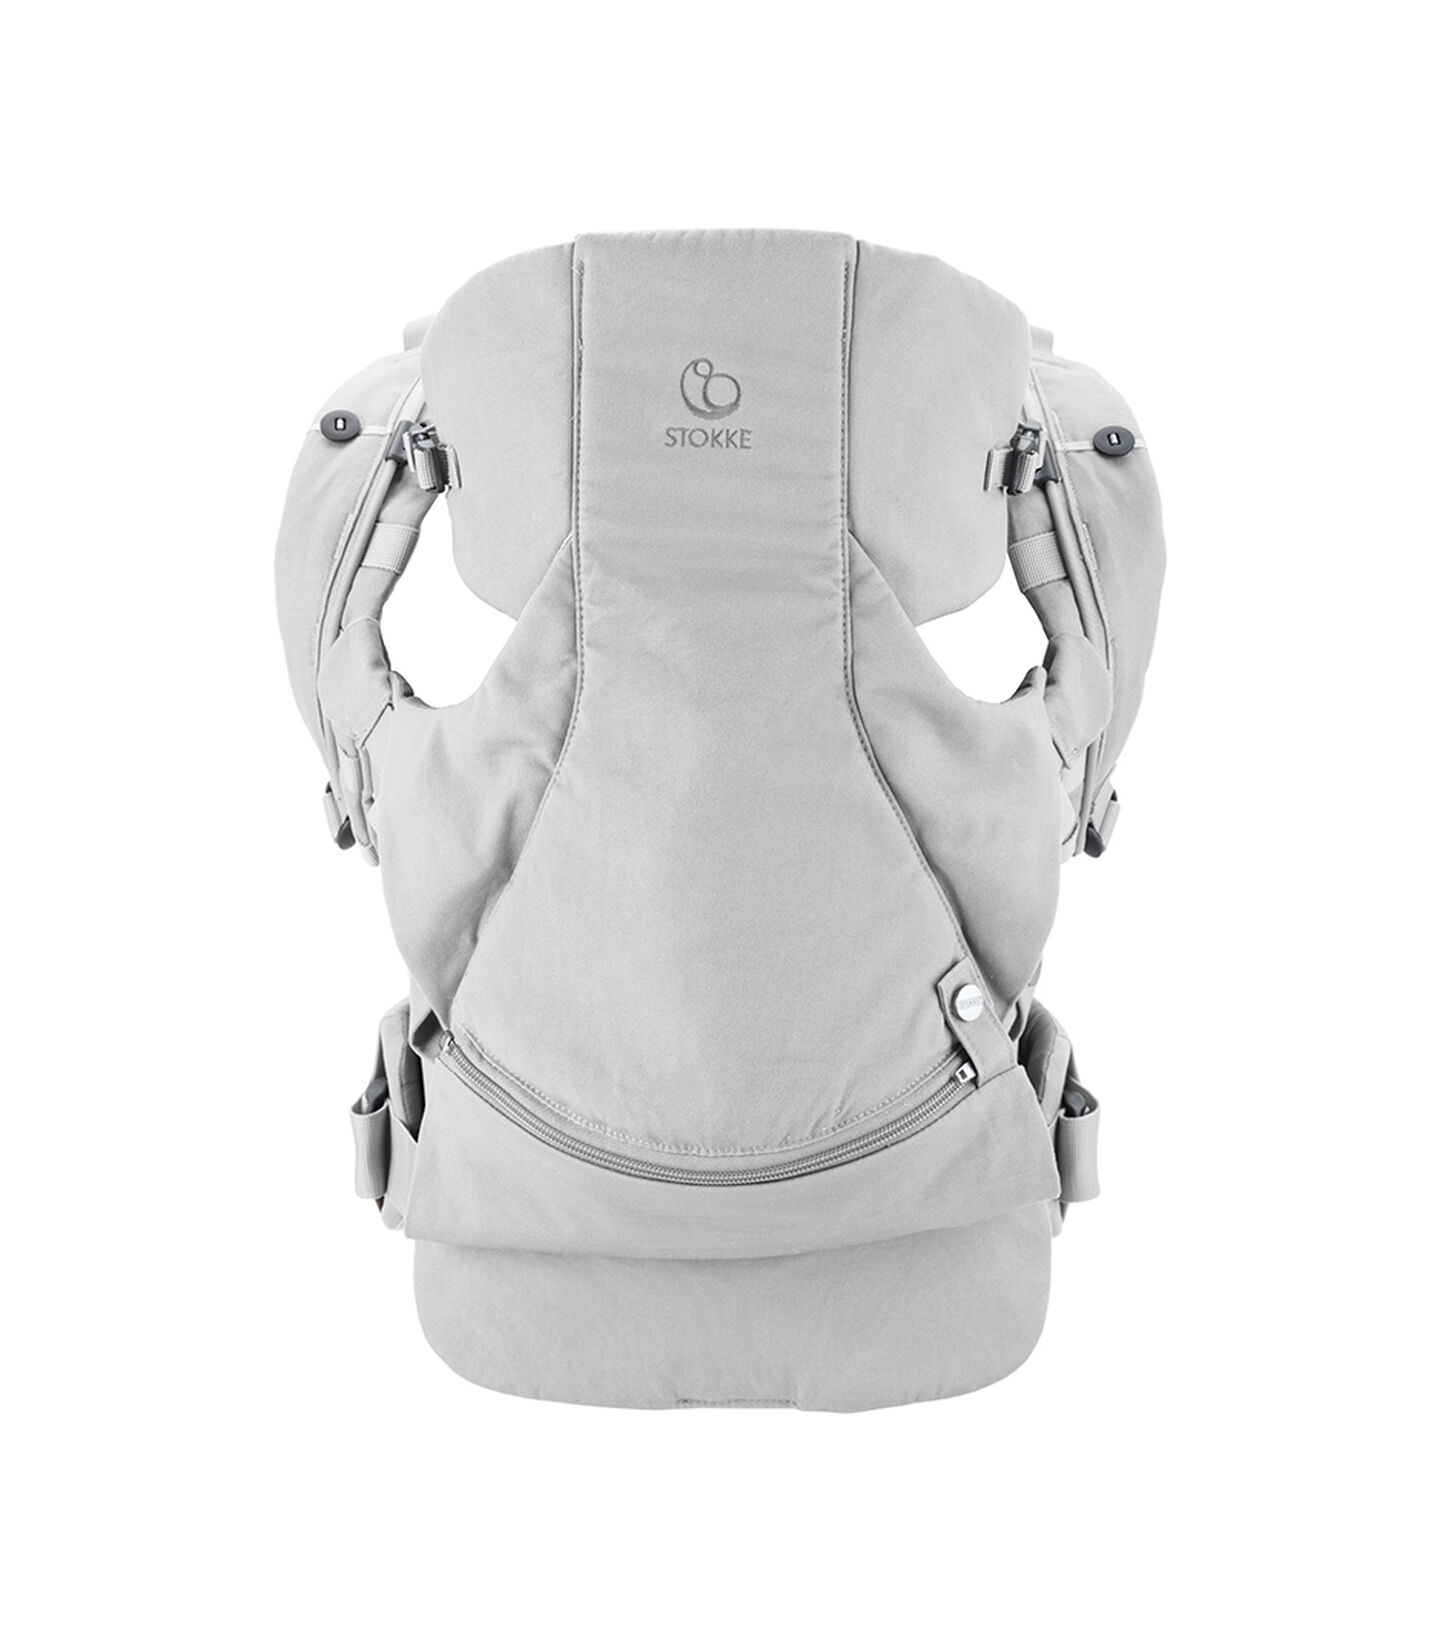 Stokke® MyCarrier™ OCS Frontal y Dorsal Gris, Gris, mainview view 1